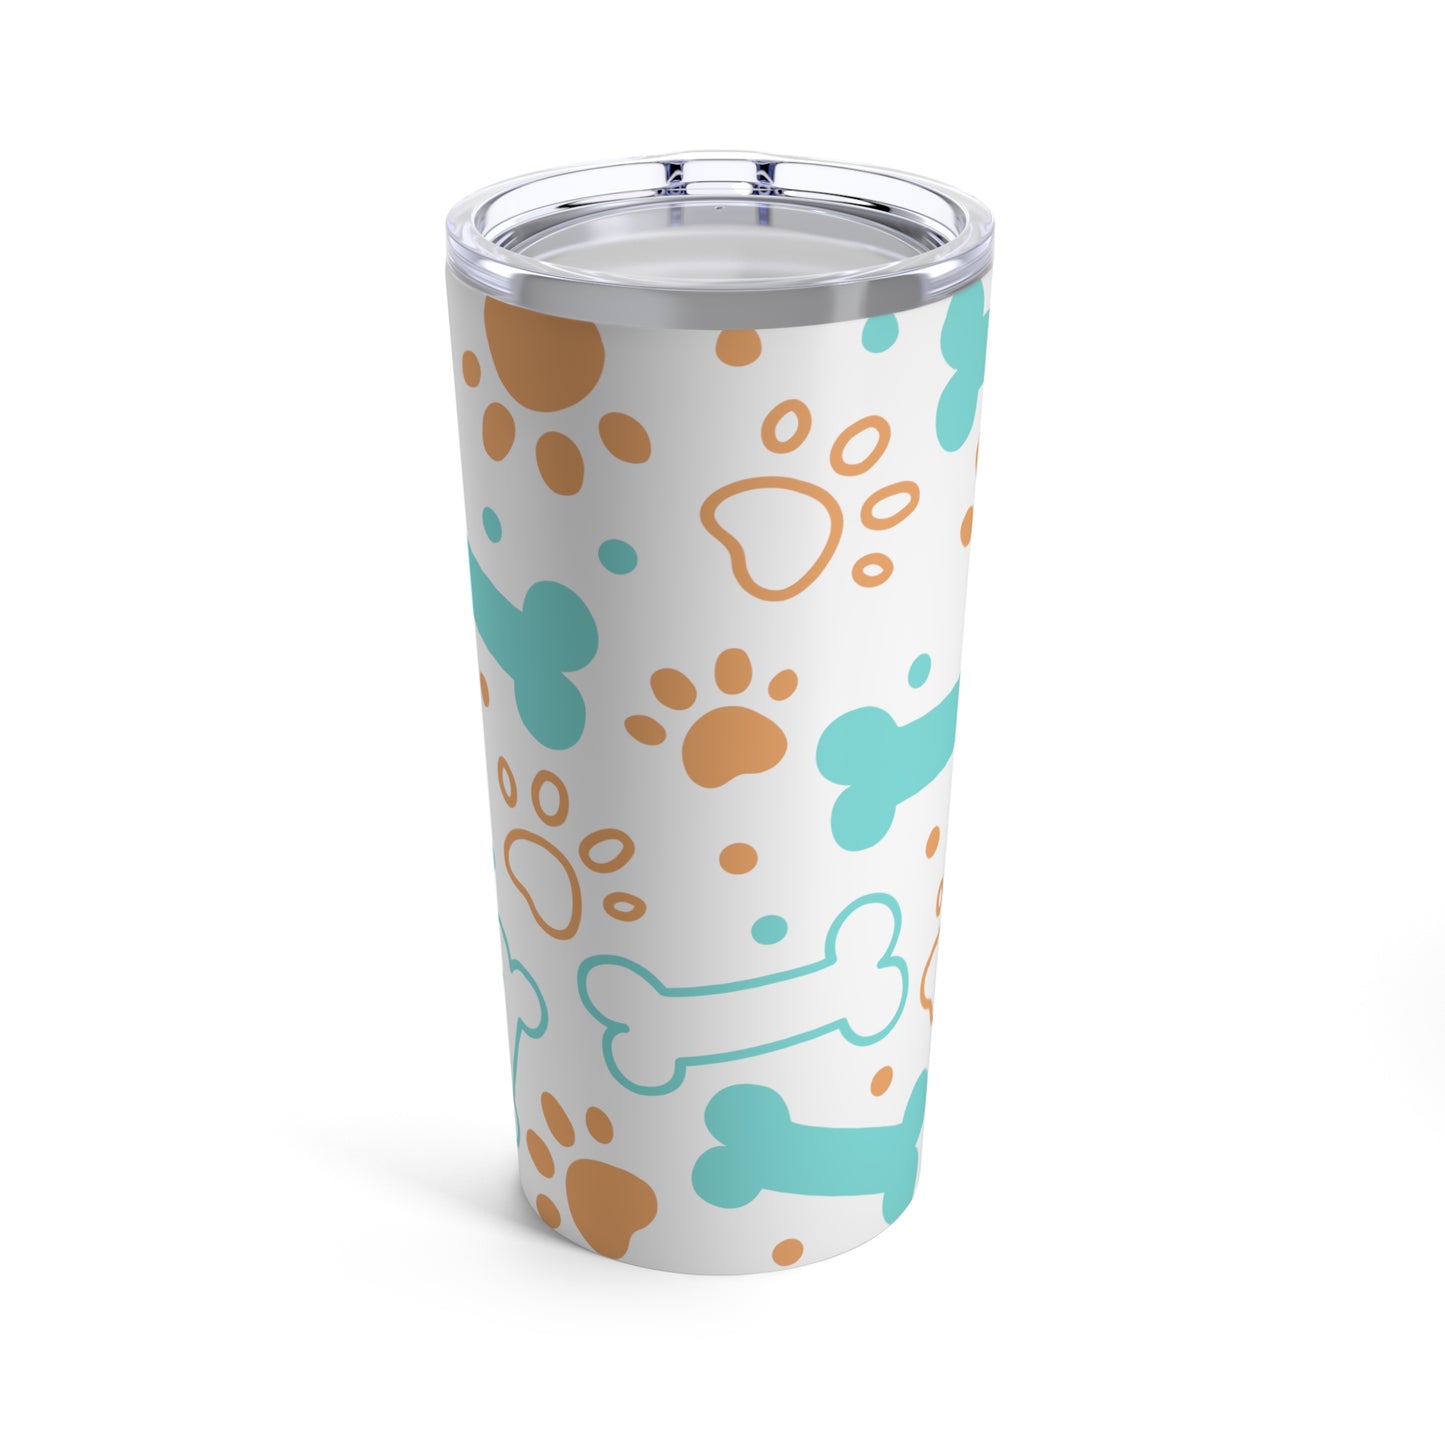 A Printify Dog Lover Tumbler with paw prints and dog paws.